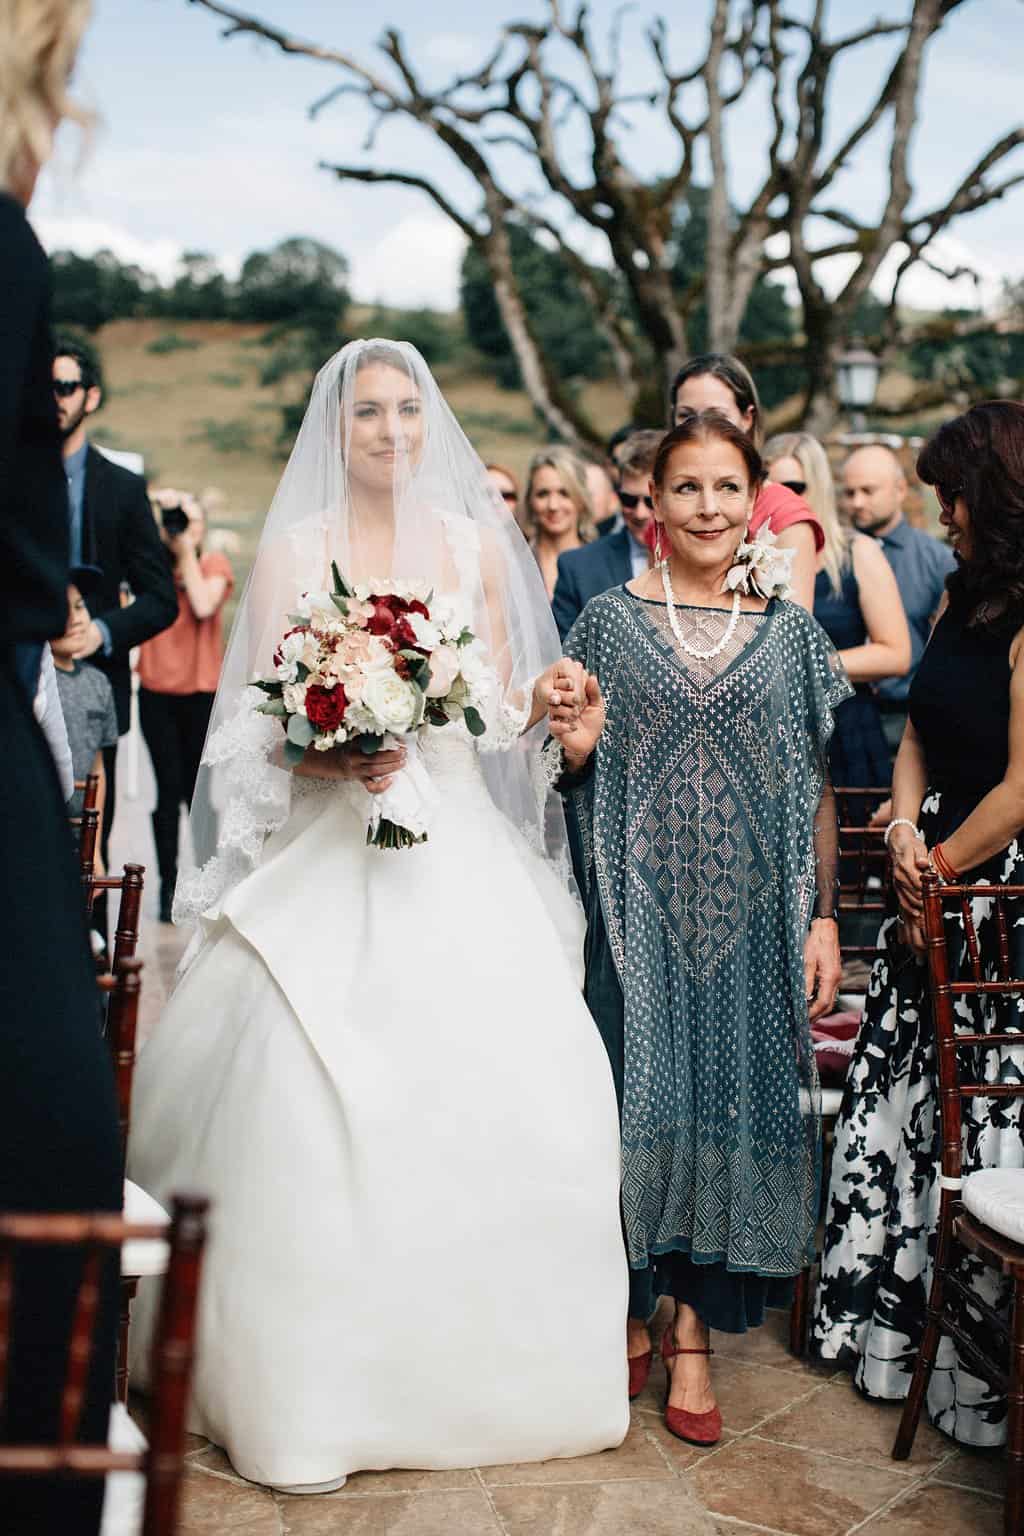 Ultra Romantic Oregon Wine Country Wedding | Taylor'd Events Group | Bethany Small Photography 